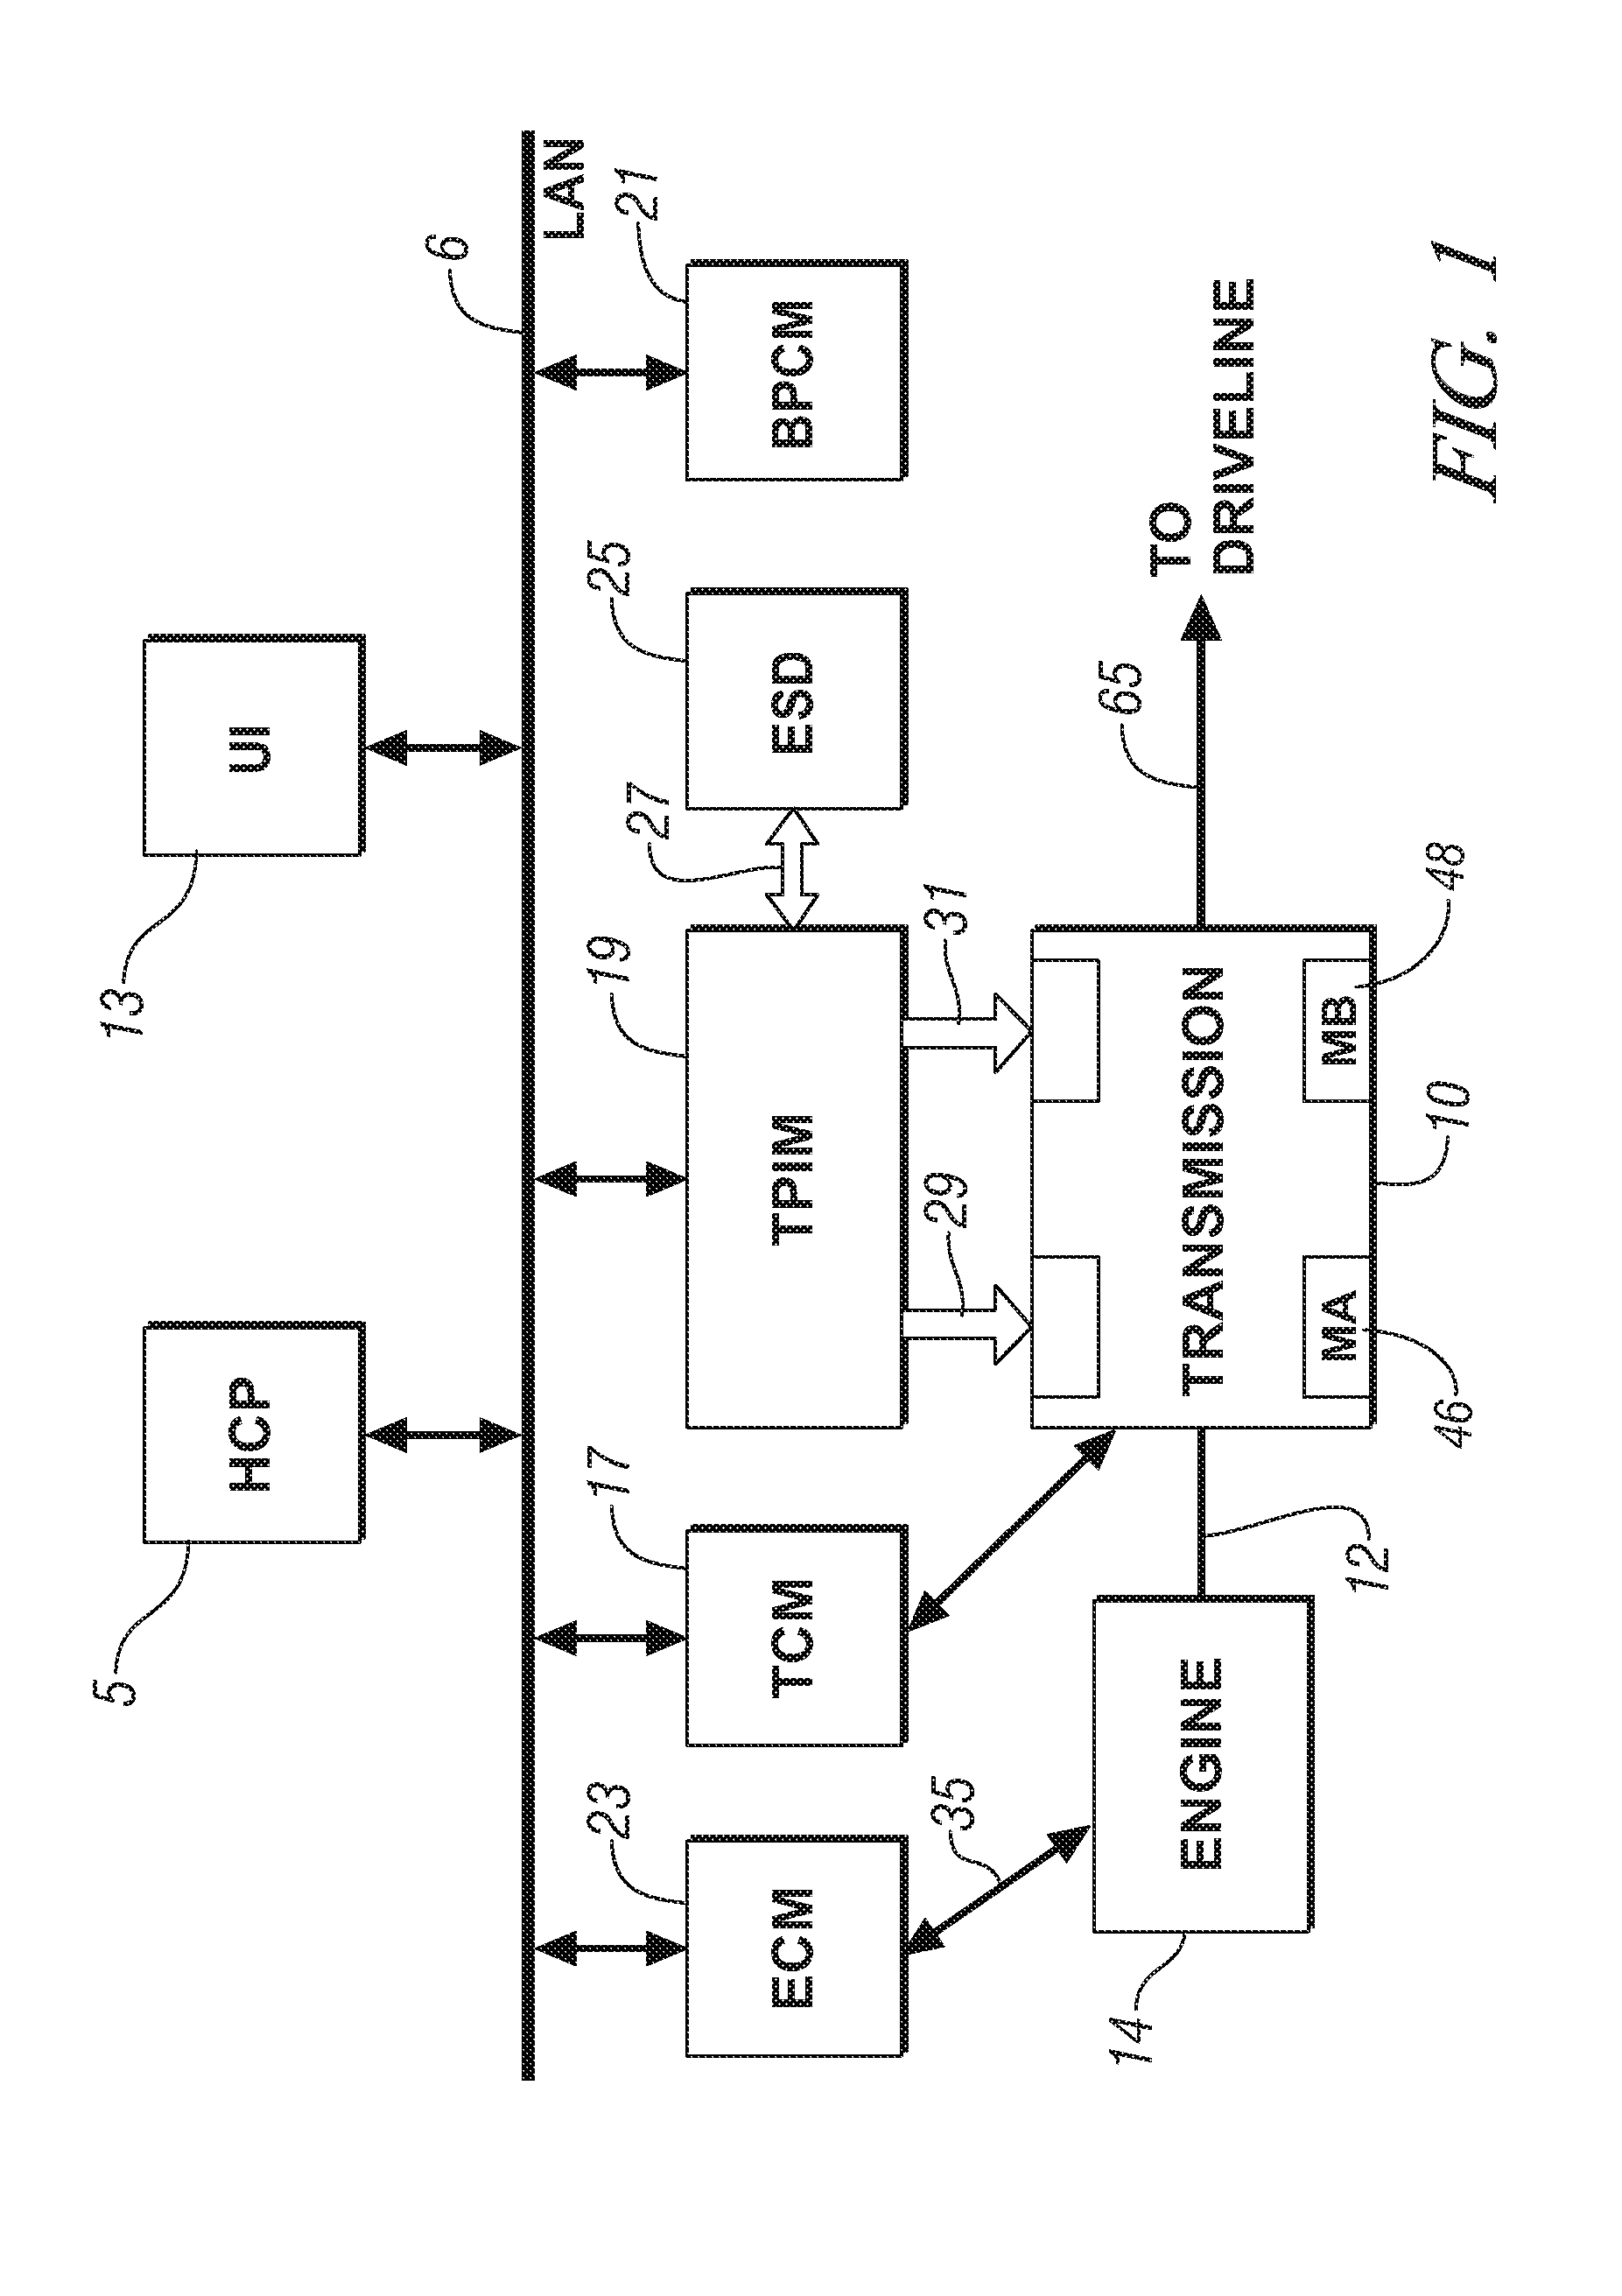 Method and apparatus to optimize engine warm up